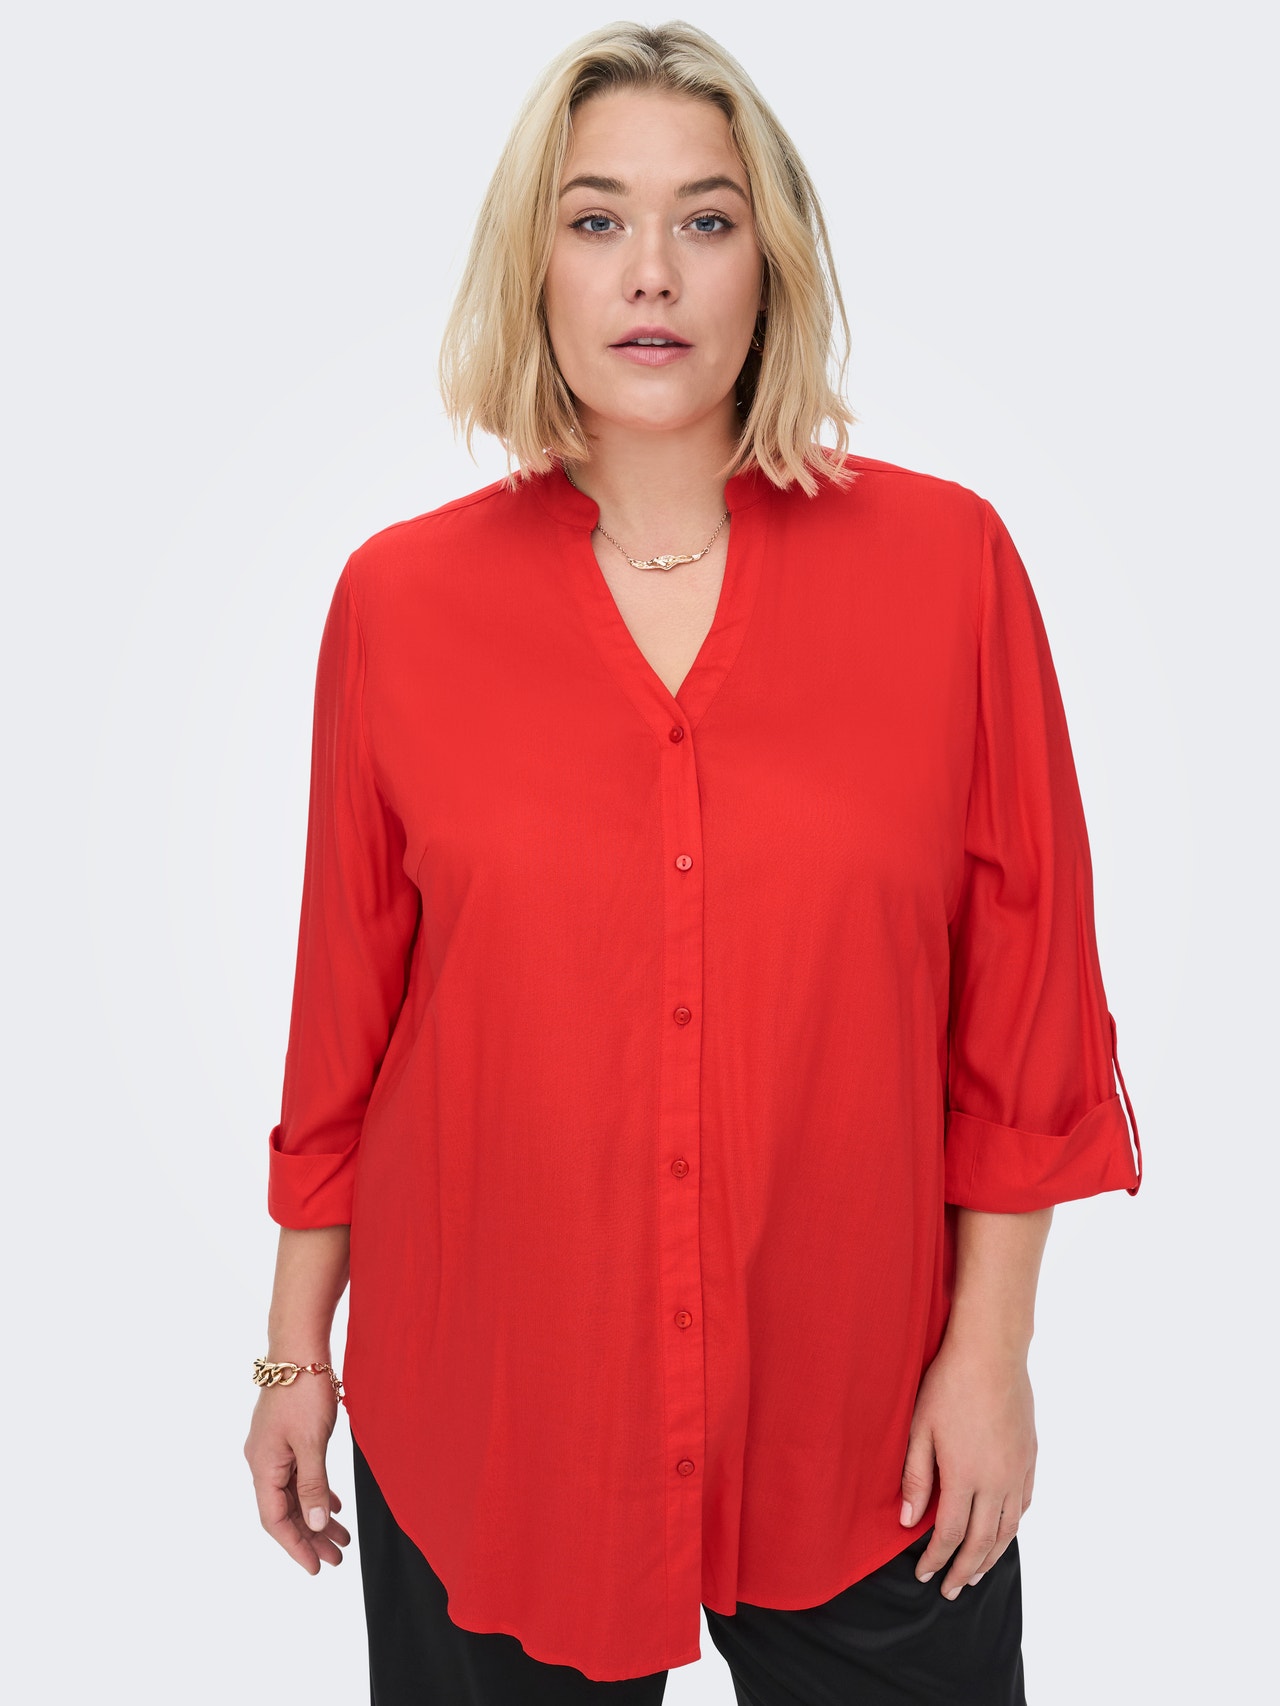 ONLY Curvy loose fitted shirt -Orange.com - 15273799